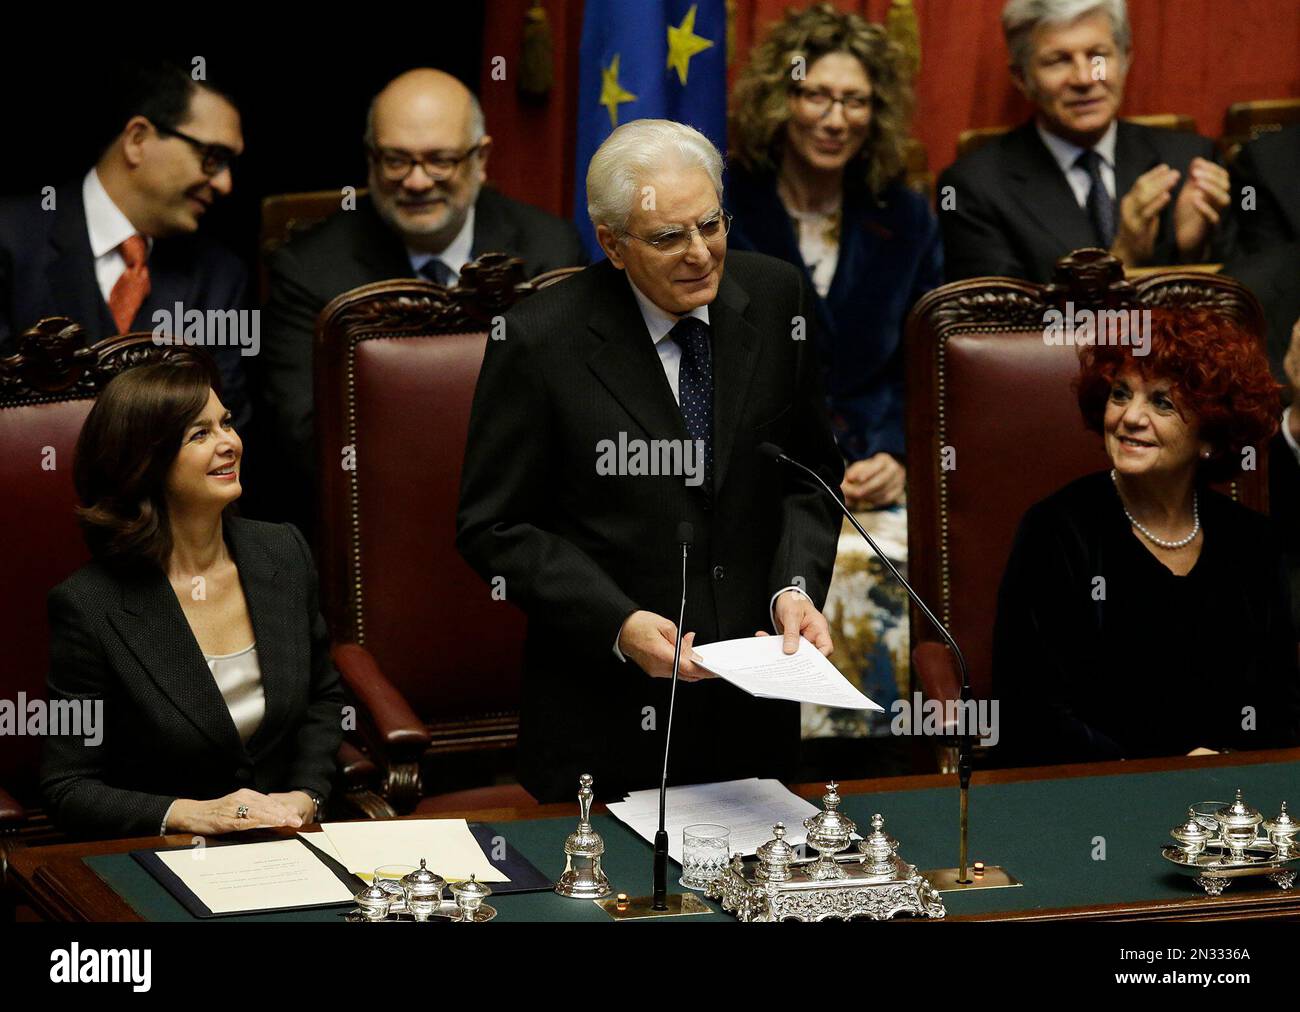 Newly elected Italian President Sergio Mattarella, center, flanked by Lower Chamber President Laura Boldrini, left, and vice-president of Italian Senate Valeria Fedeli, right, delivers his speech during his swearing-in ceremony at the Lower Chamber in Rome, Tuesday, Feb. 3, 2015. Sergio Mattarella on Monday resigned from his post as constitutional judge, a day before his swearing-in ceremony. Mattarella, 73, was elected as the new president on Saturday, in the fourth round of balloting held by Italian parliament in joint session. (AP Photo/Gregorio Borgia) Stock Photo